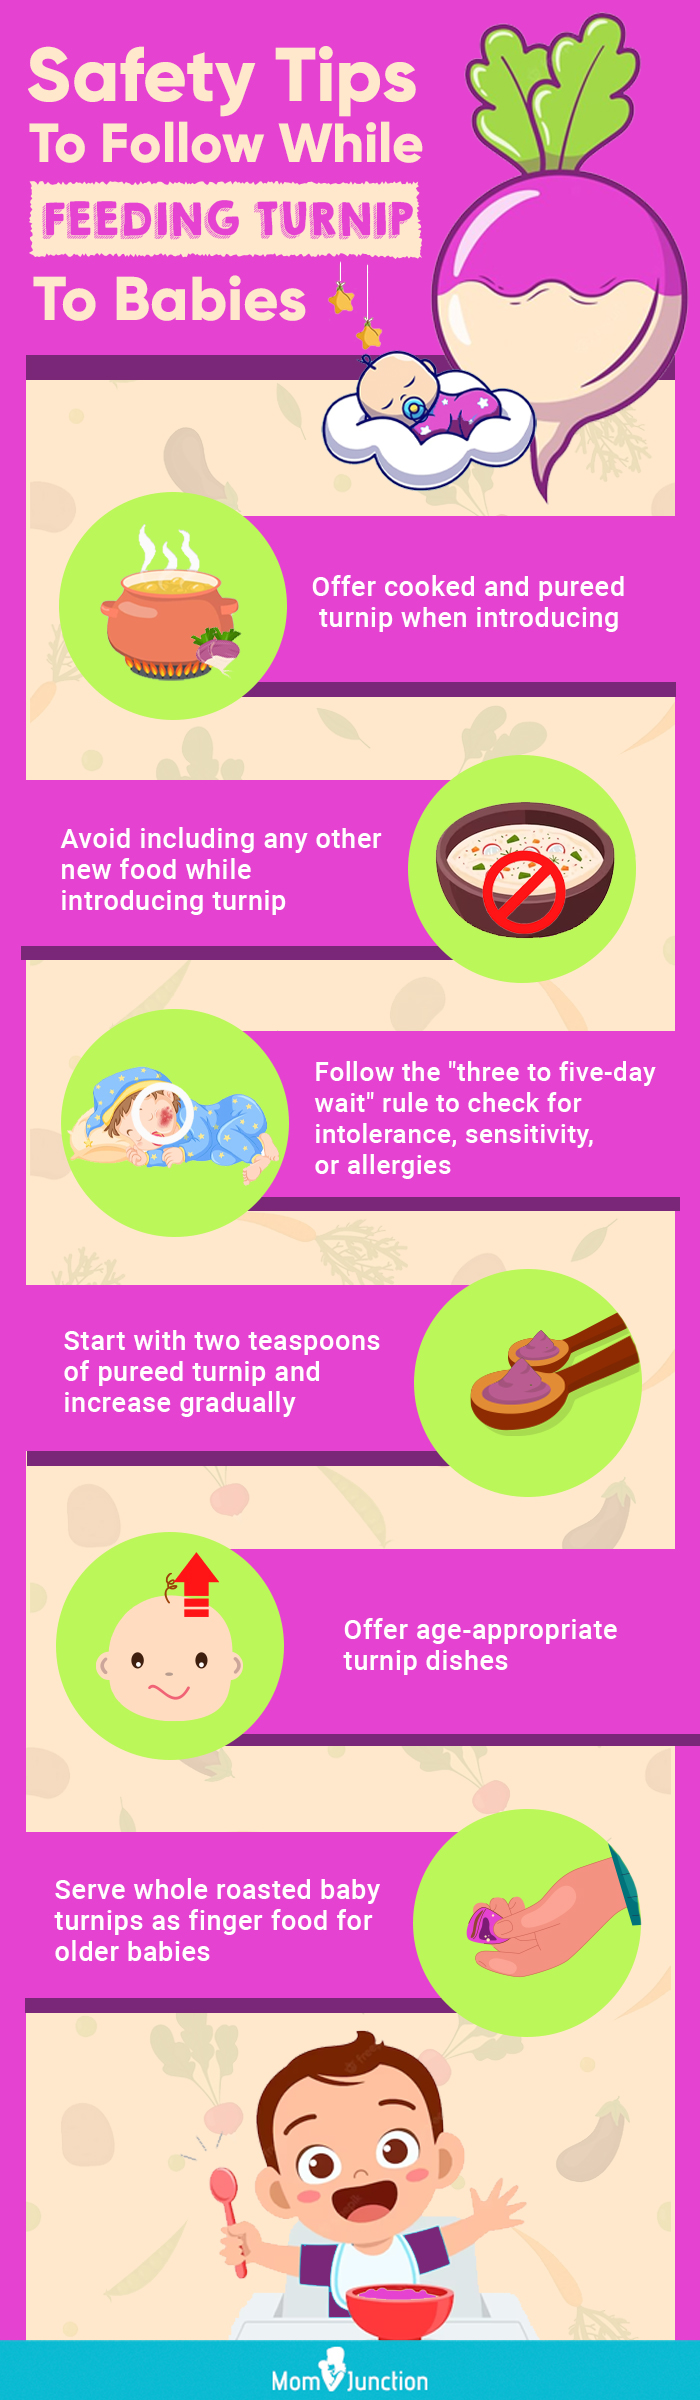  safety tips to follow when feeding turnip to babies(infographic)